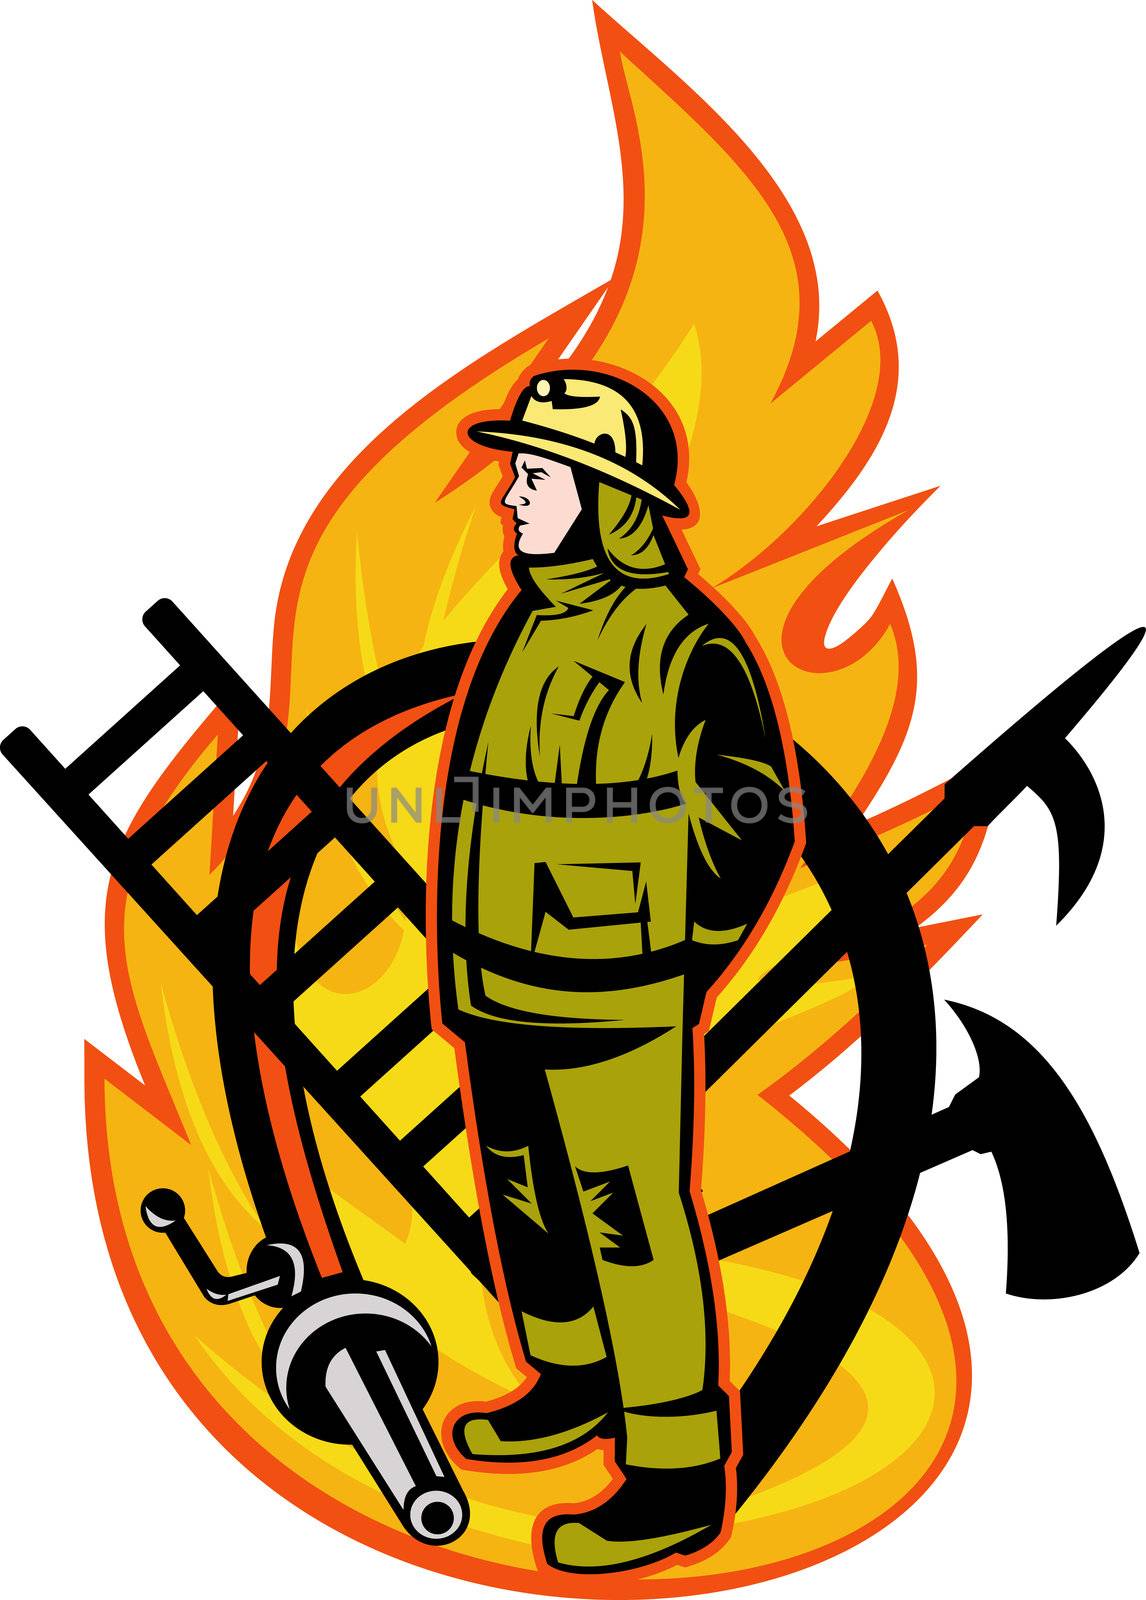 illustration of a Firefighter with axe ladder, spear, hook and fire hose.